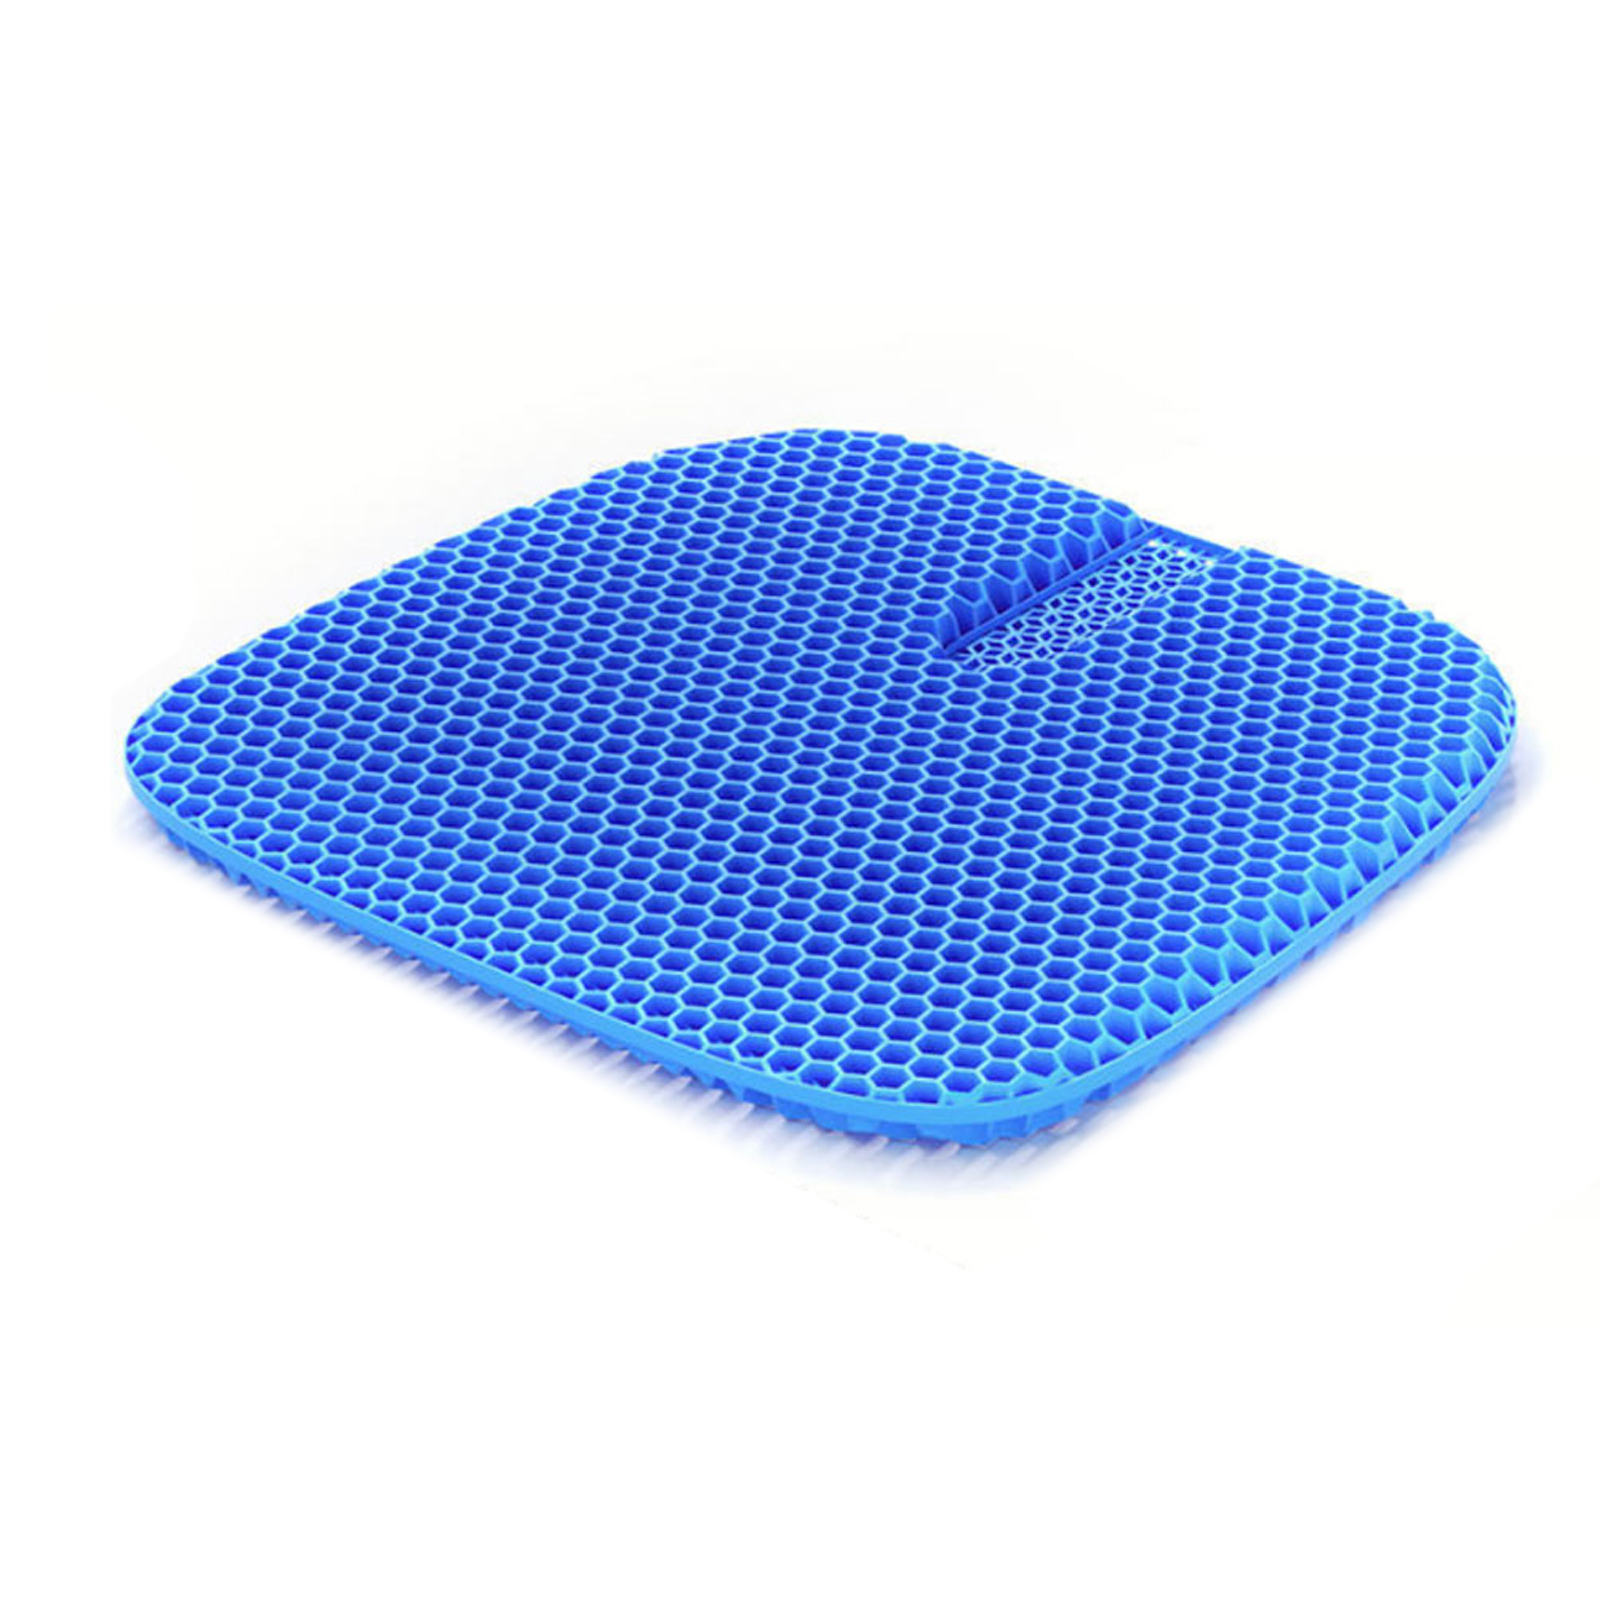 Car Seat Cushion Gel Cooling Pad Thick Big Breathable 3D Honeycomb Design Absorbs Pressure Seat Cushion